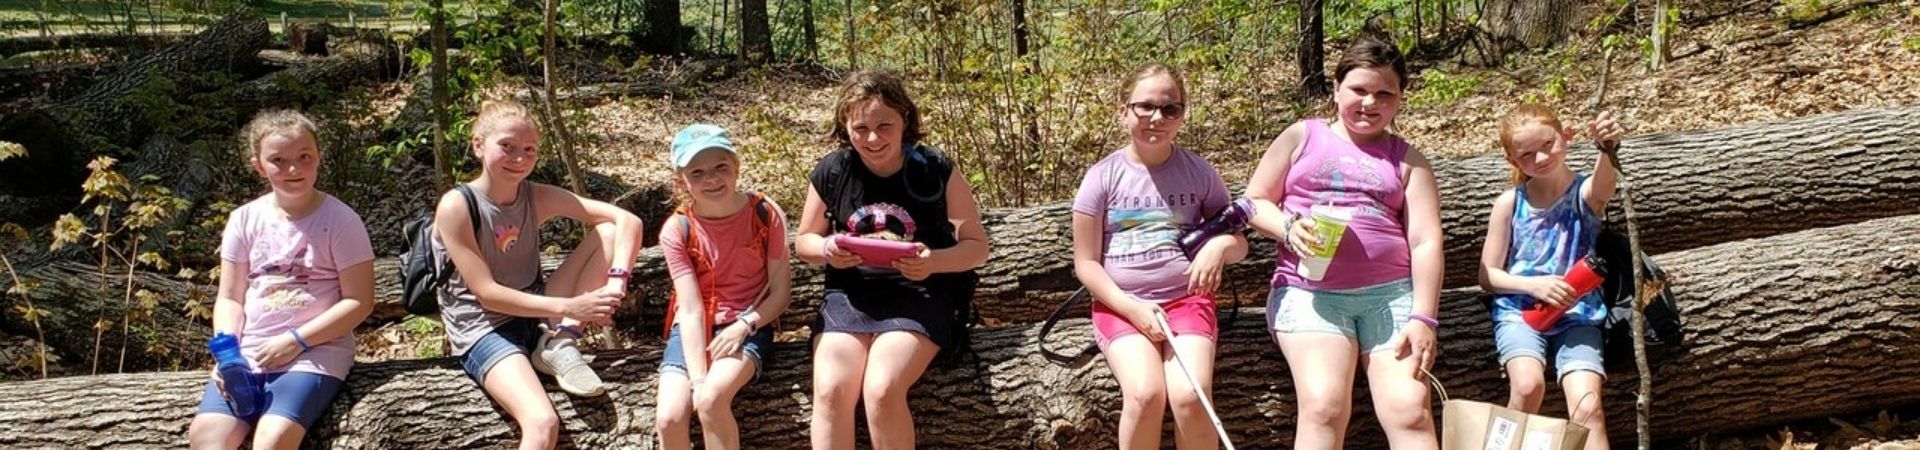  Troop 115 sitting on a log in the woods 